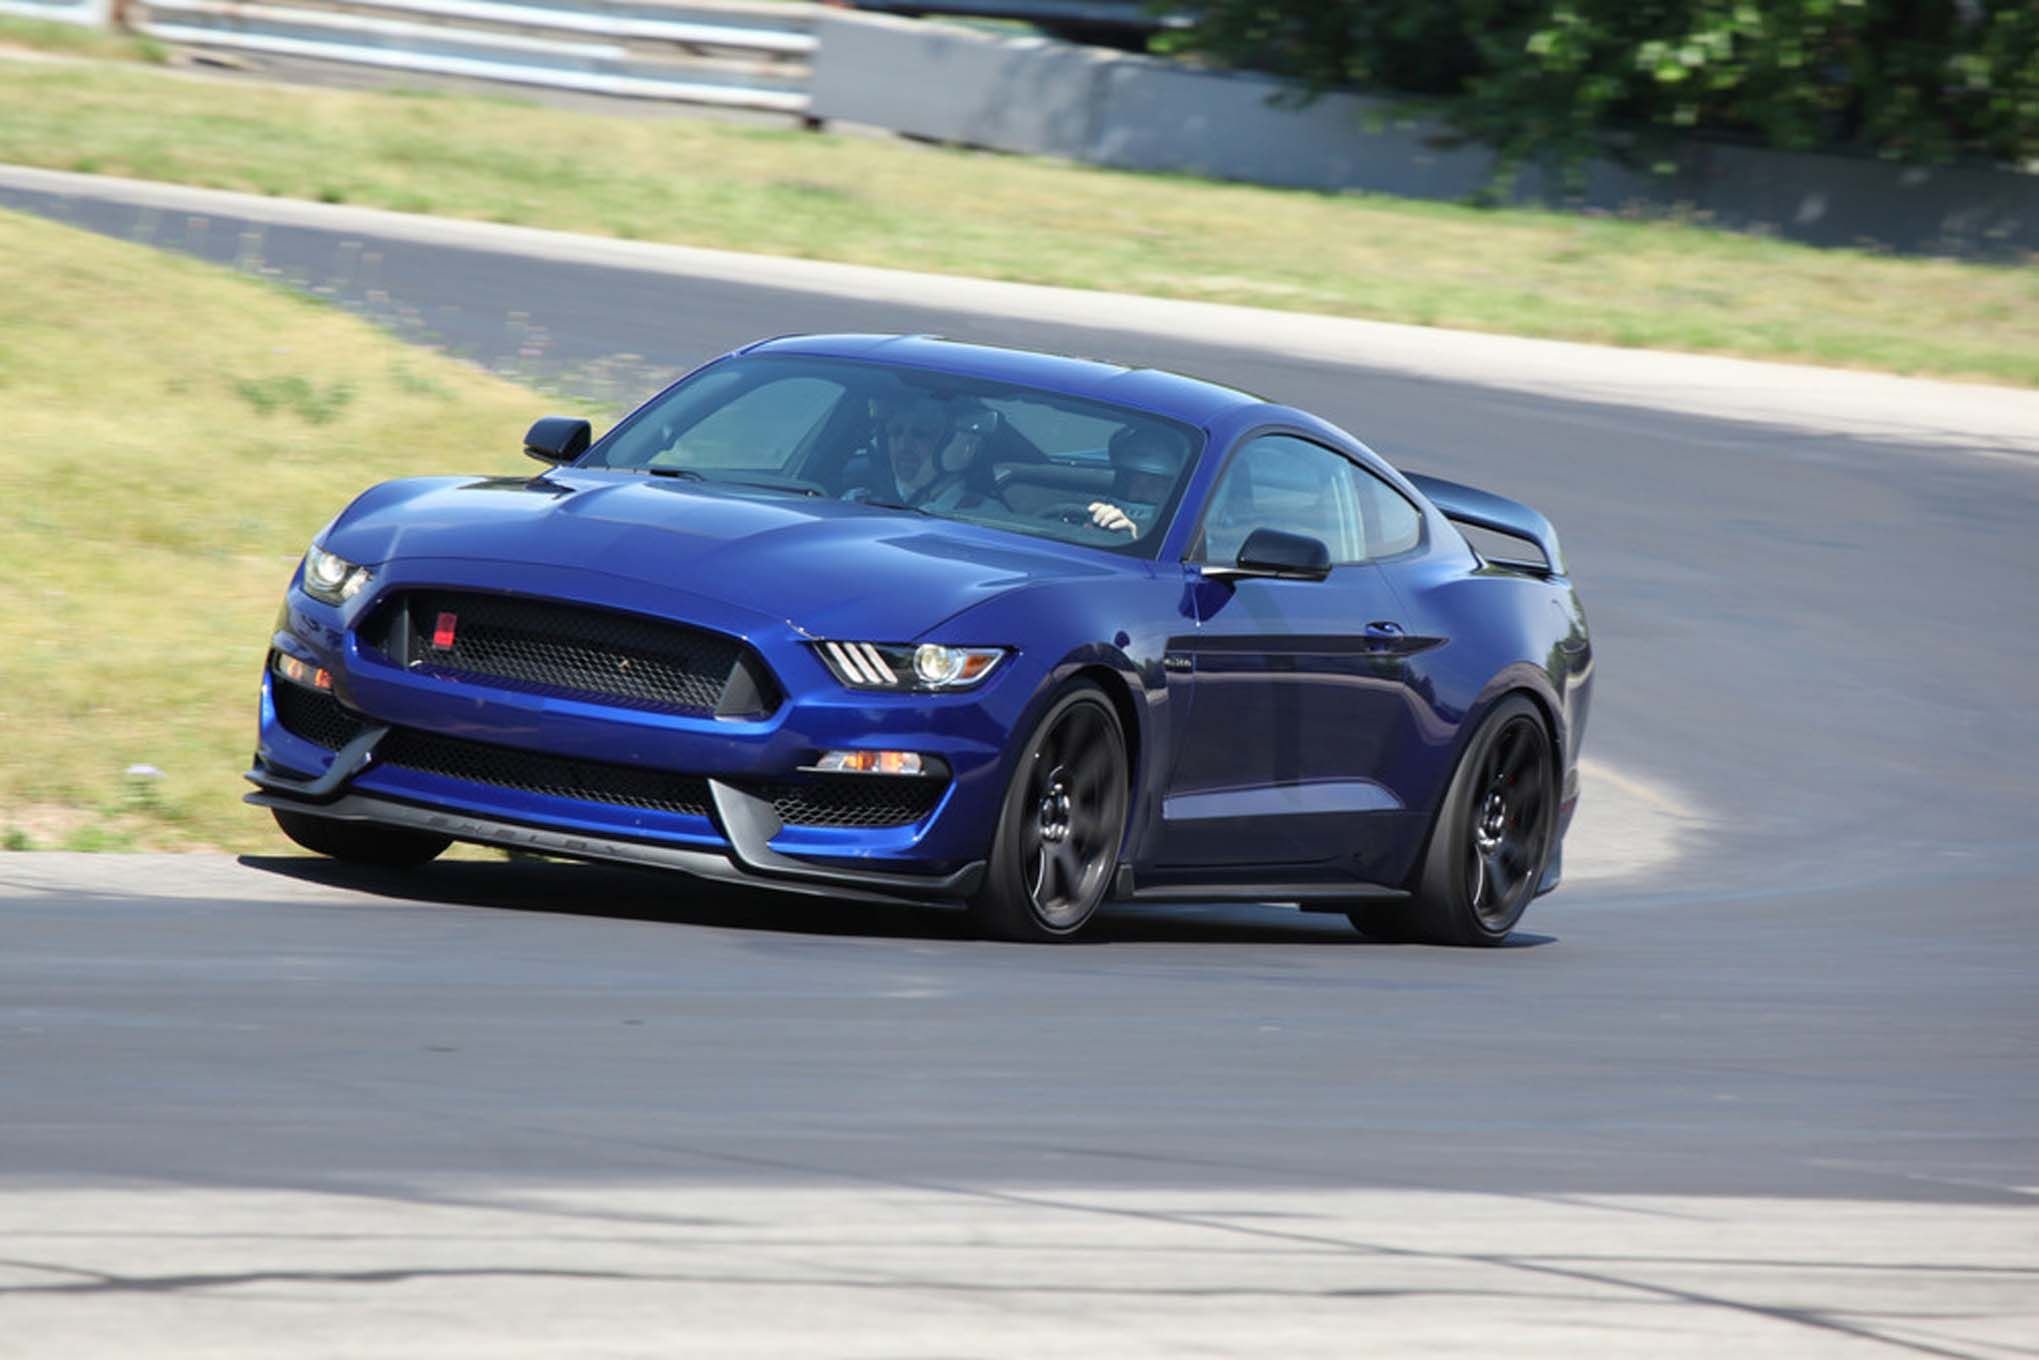 2014, Ford, Mustang, Shelby, Gt350r, Muscle, Supercar, Usa,  01 Wallpaper